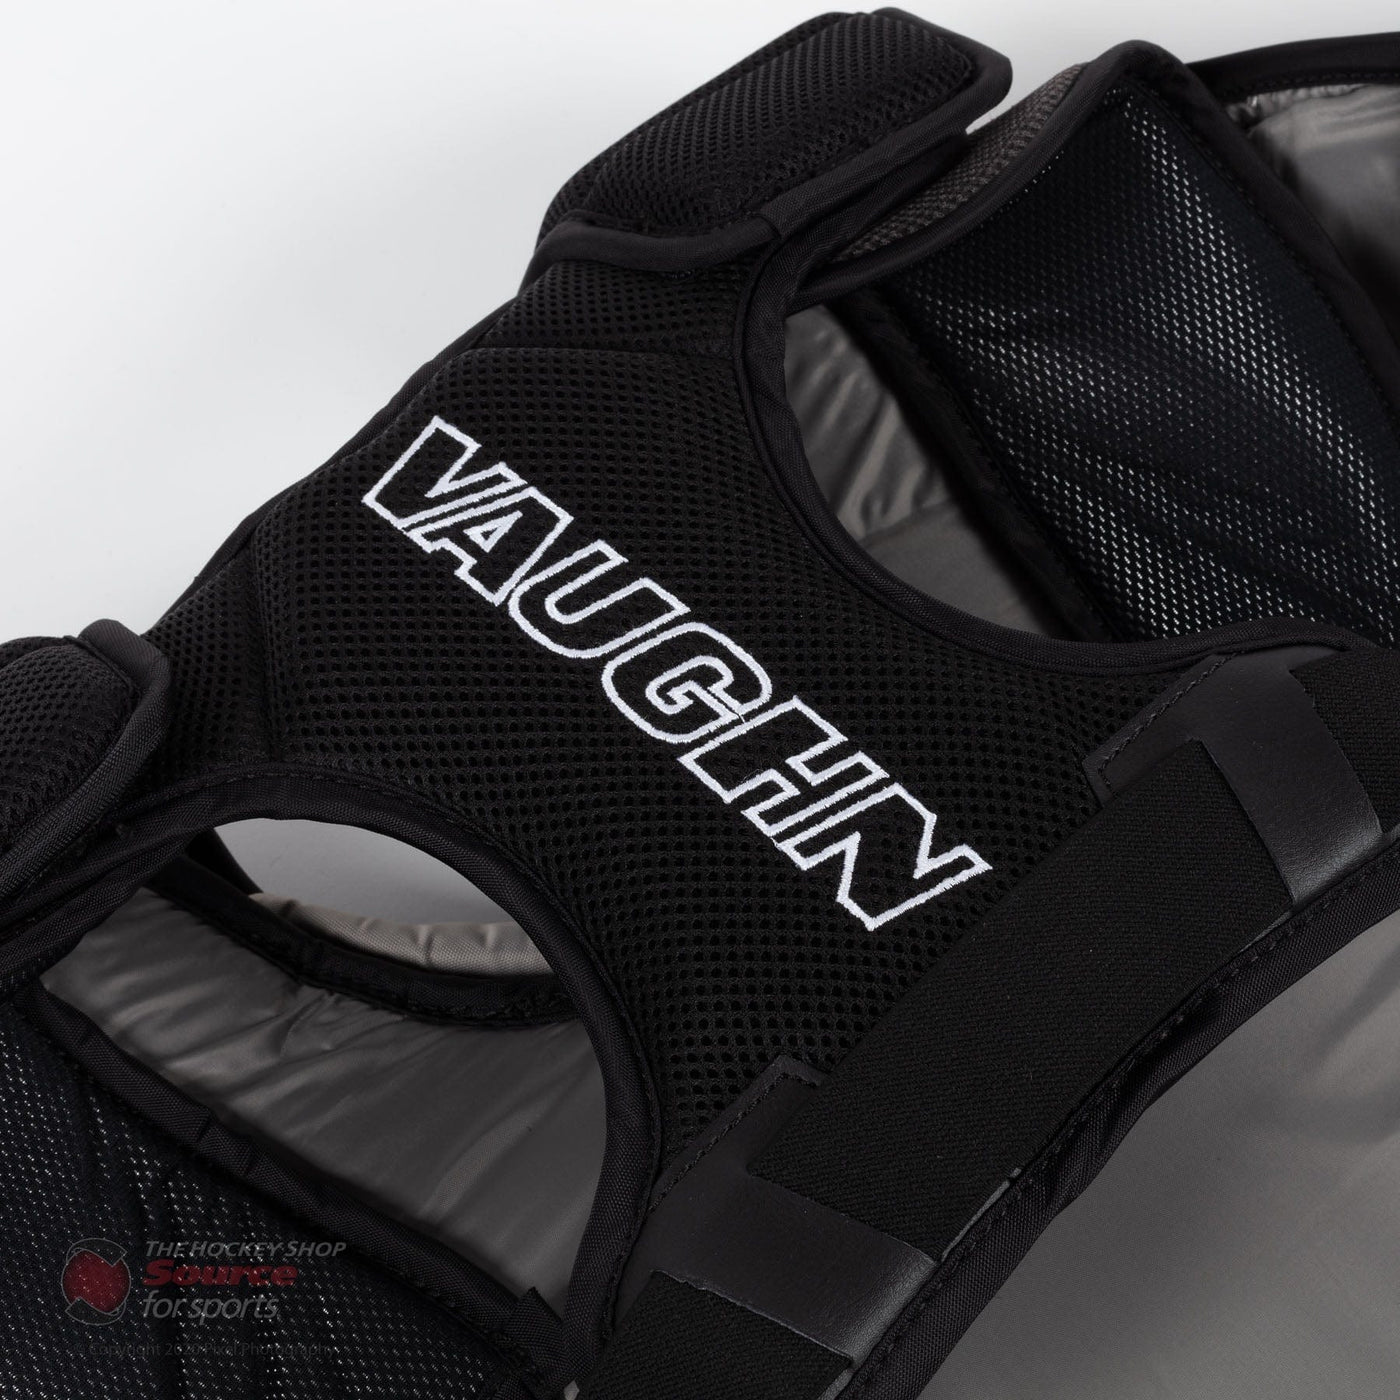 Vaughn Velocity V9 Youth Chest & Arm Protector